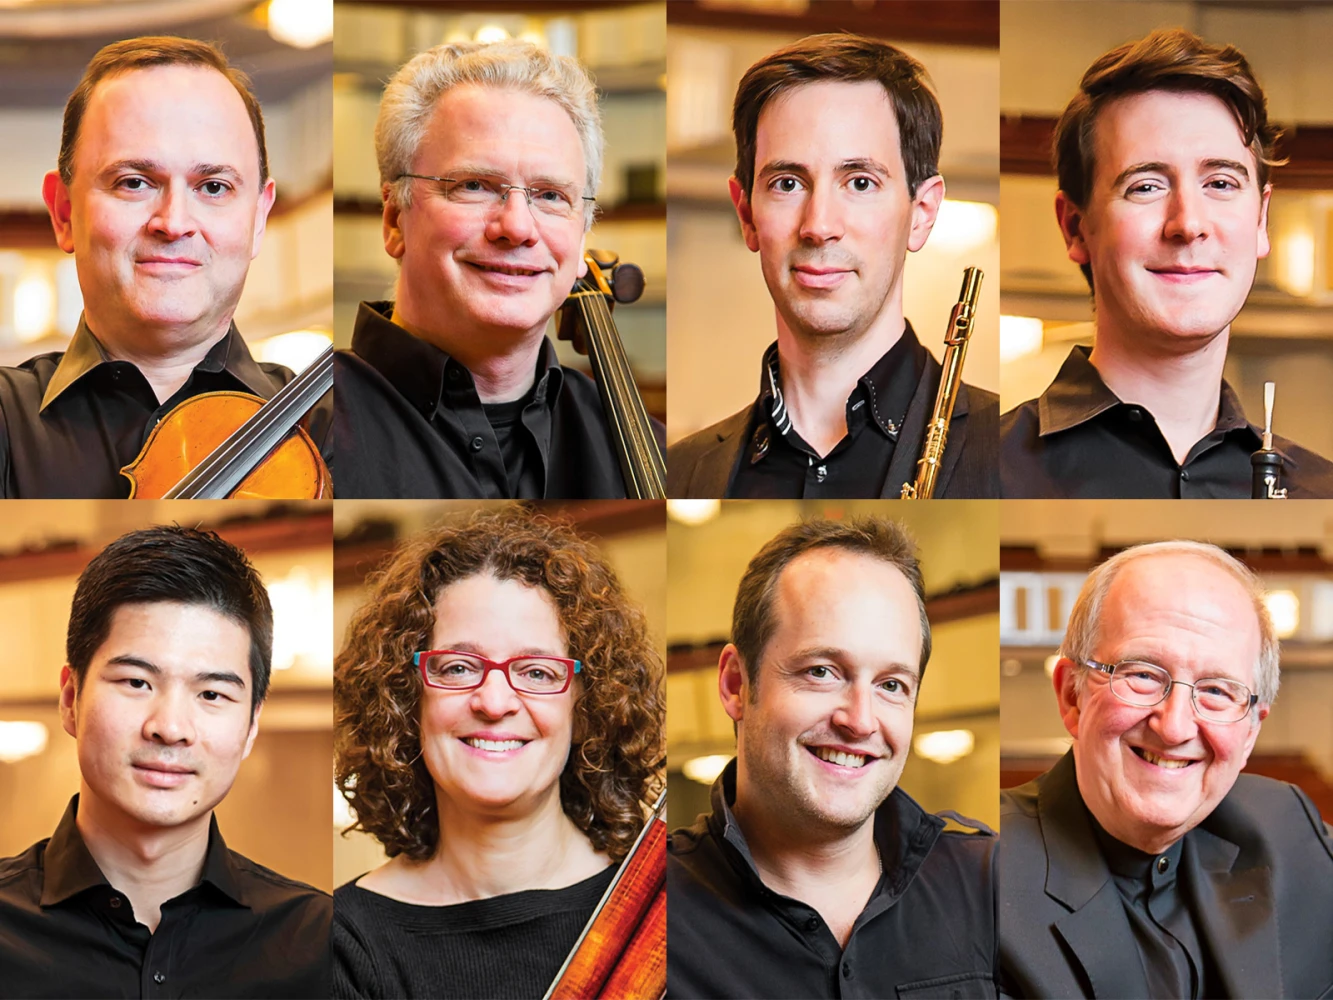 The Kennedy Center Chamber Players: Spring Concert: What to expect - 2